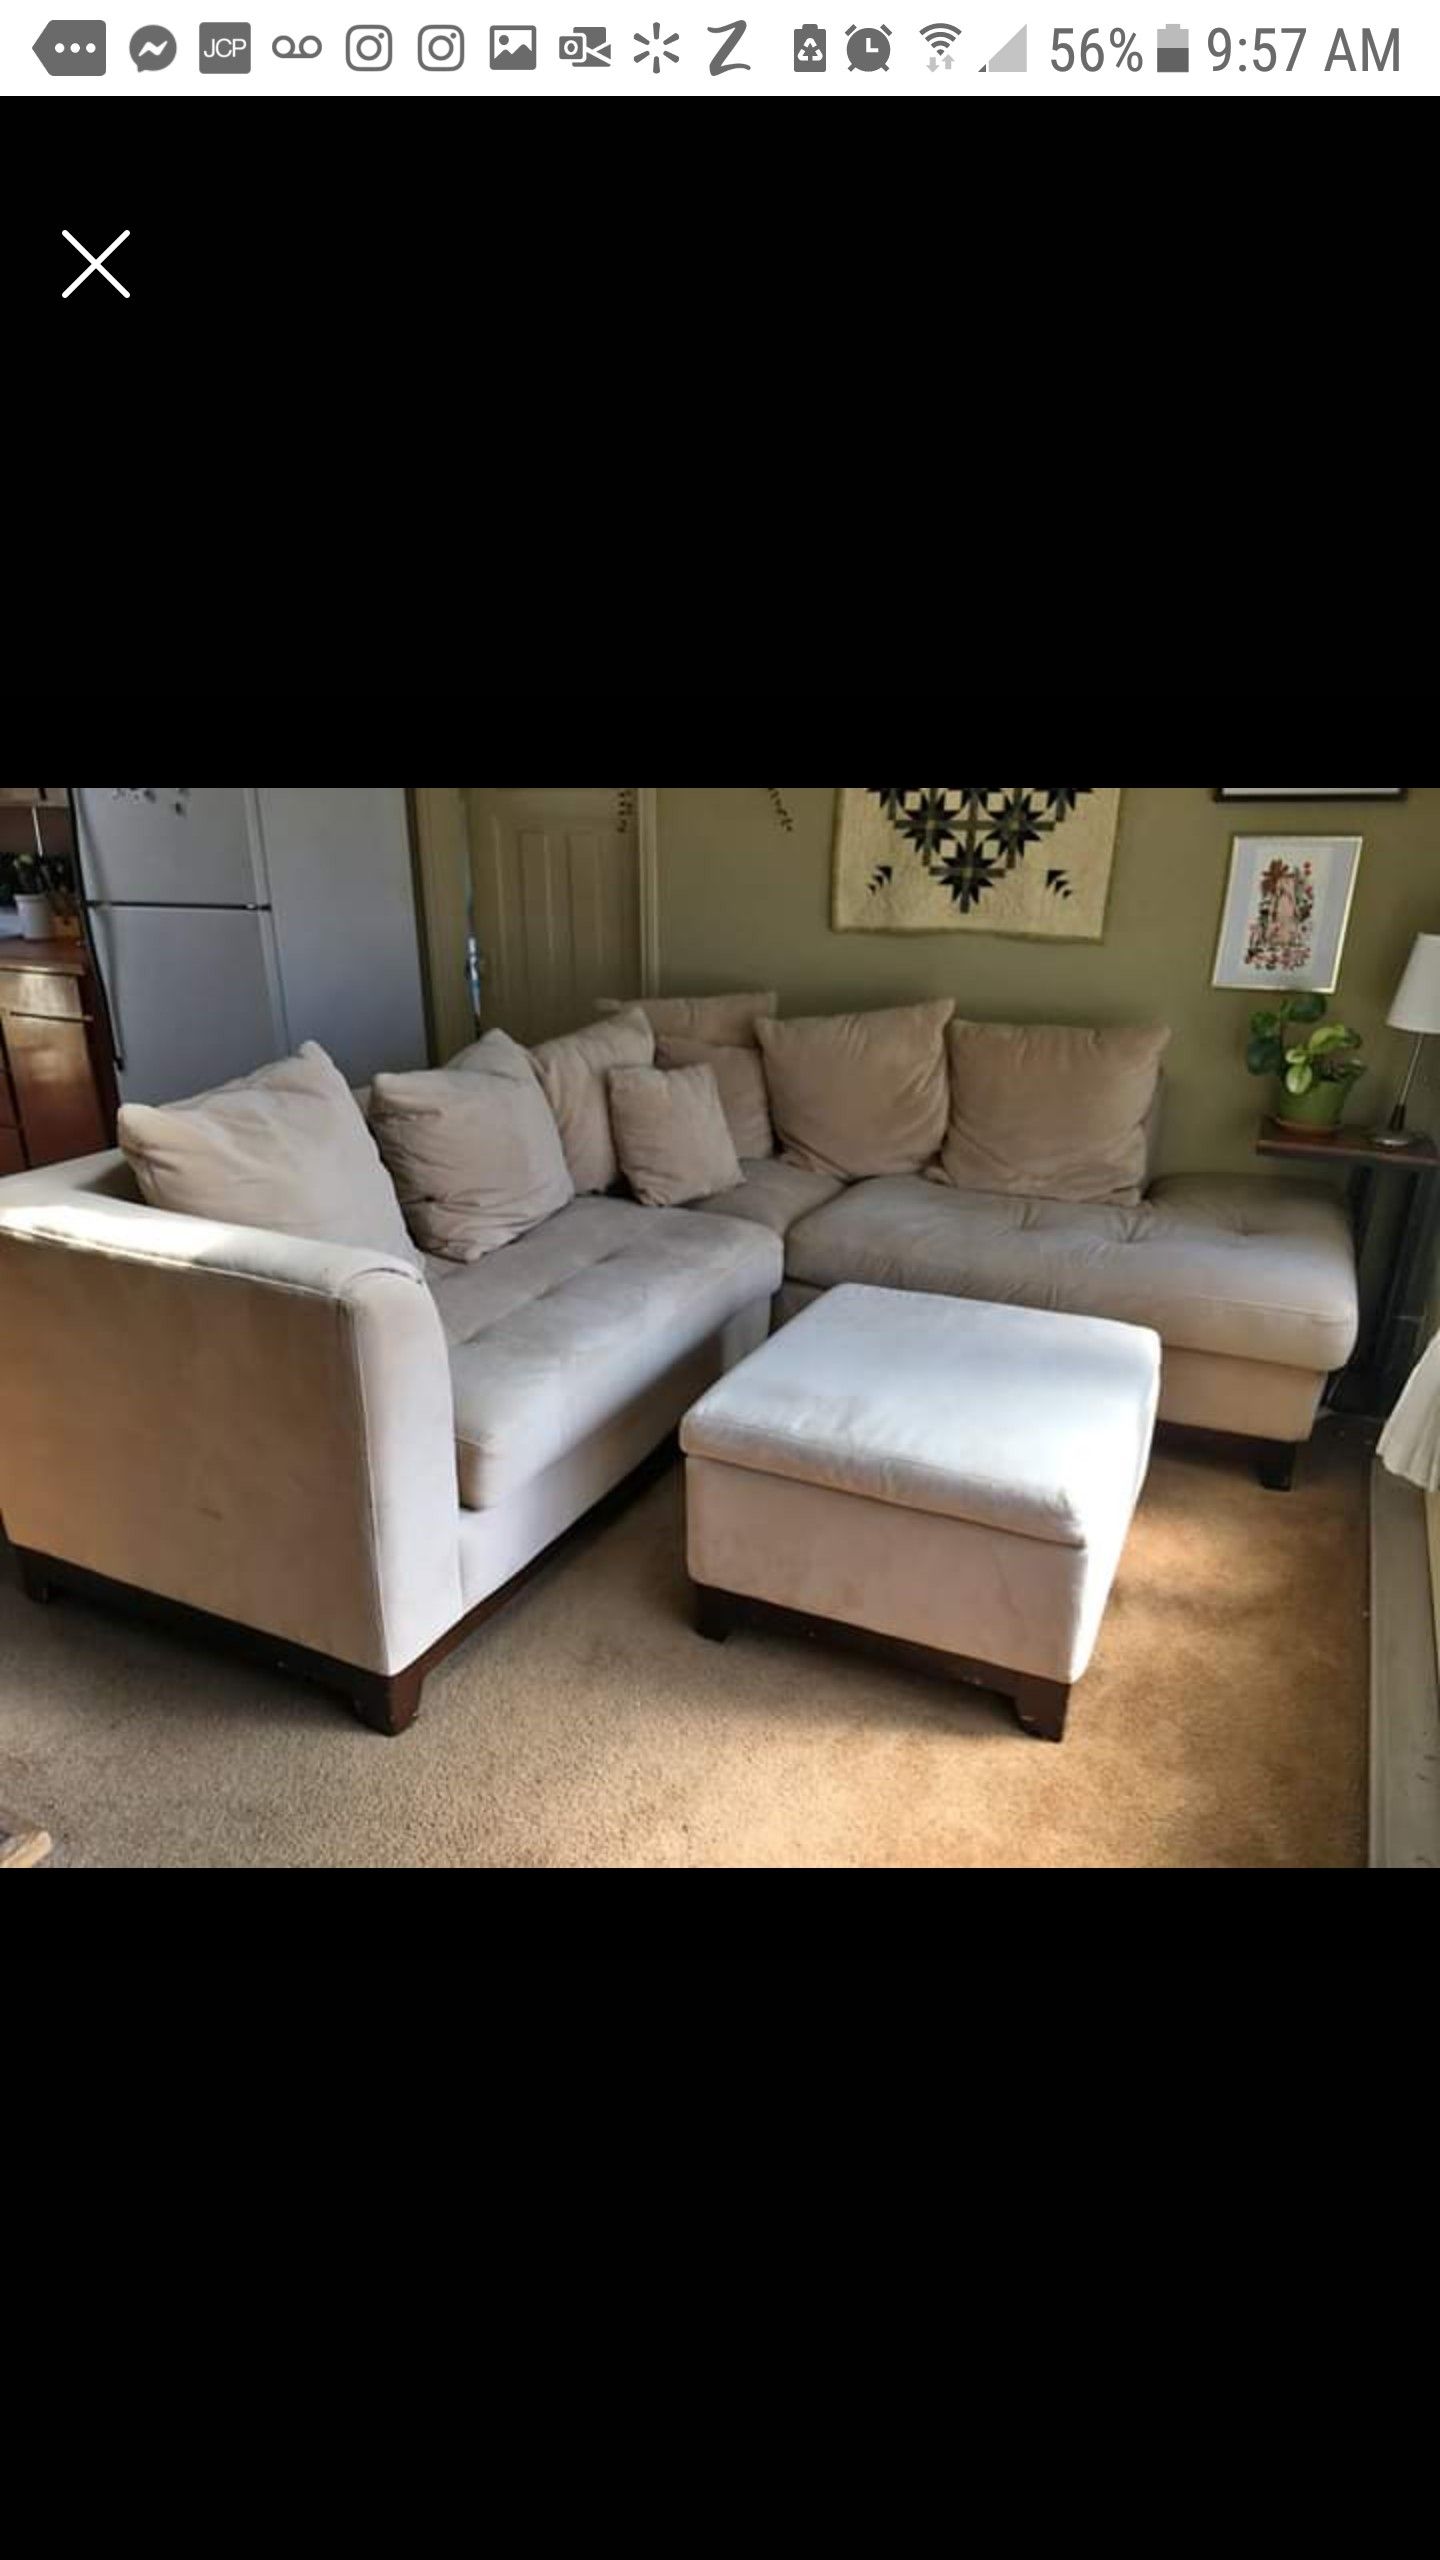 3 pcs Sectional couch, 2 couches plus ottoman